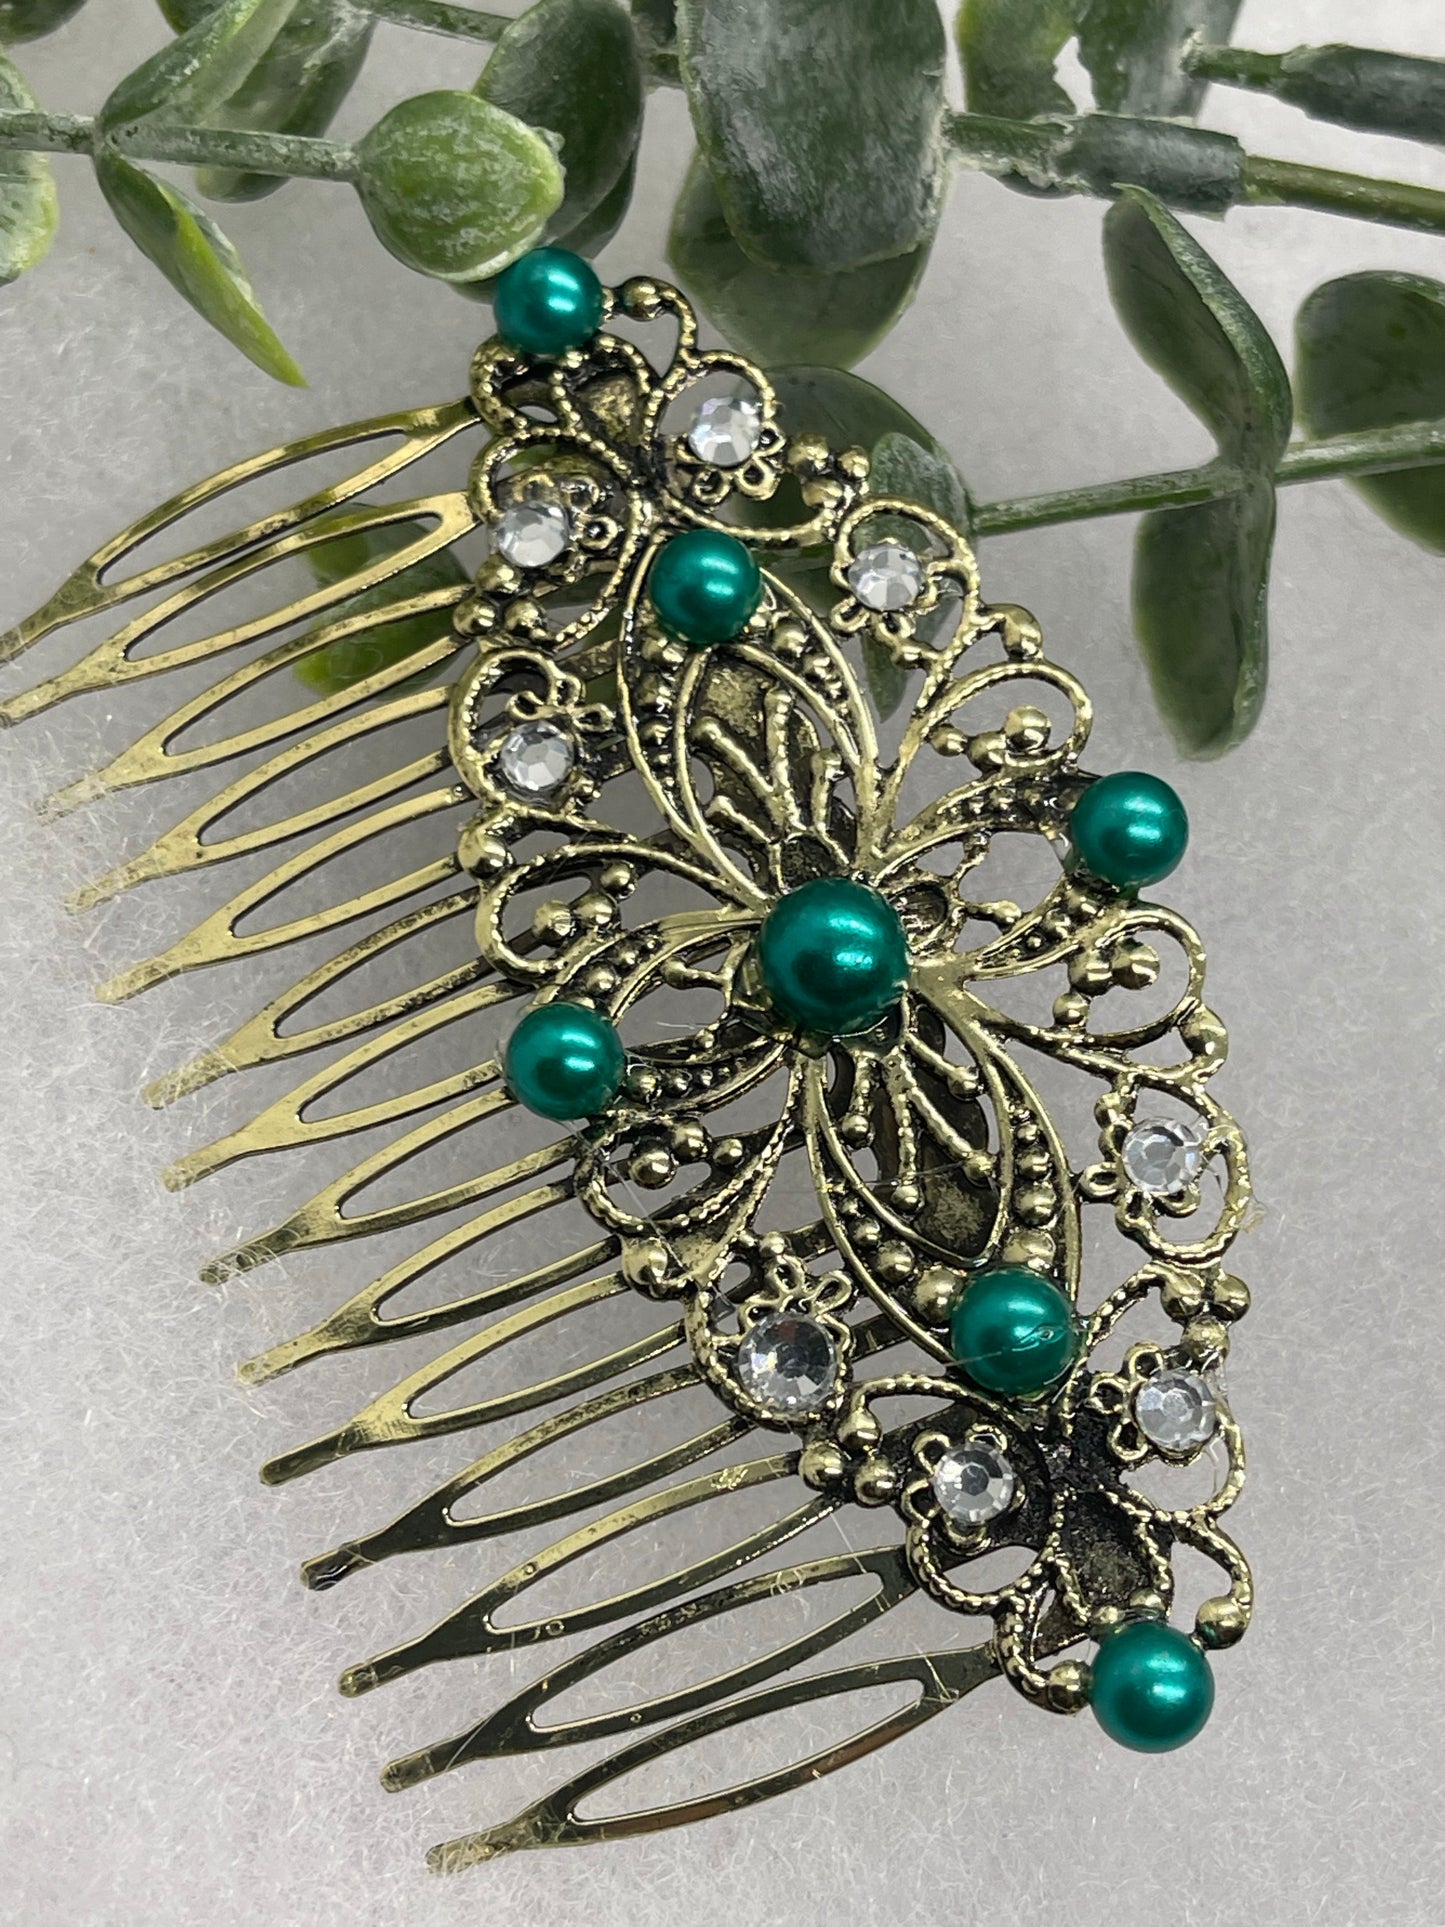 Green emerald  crystal Pearl vintage style silver tone side comb hair accessory accessories gift birthday